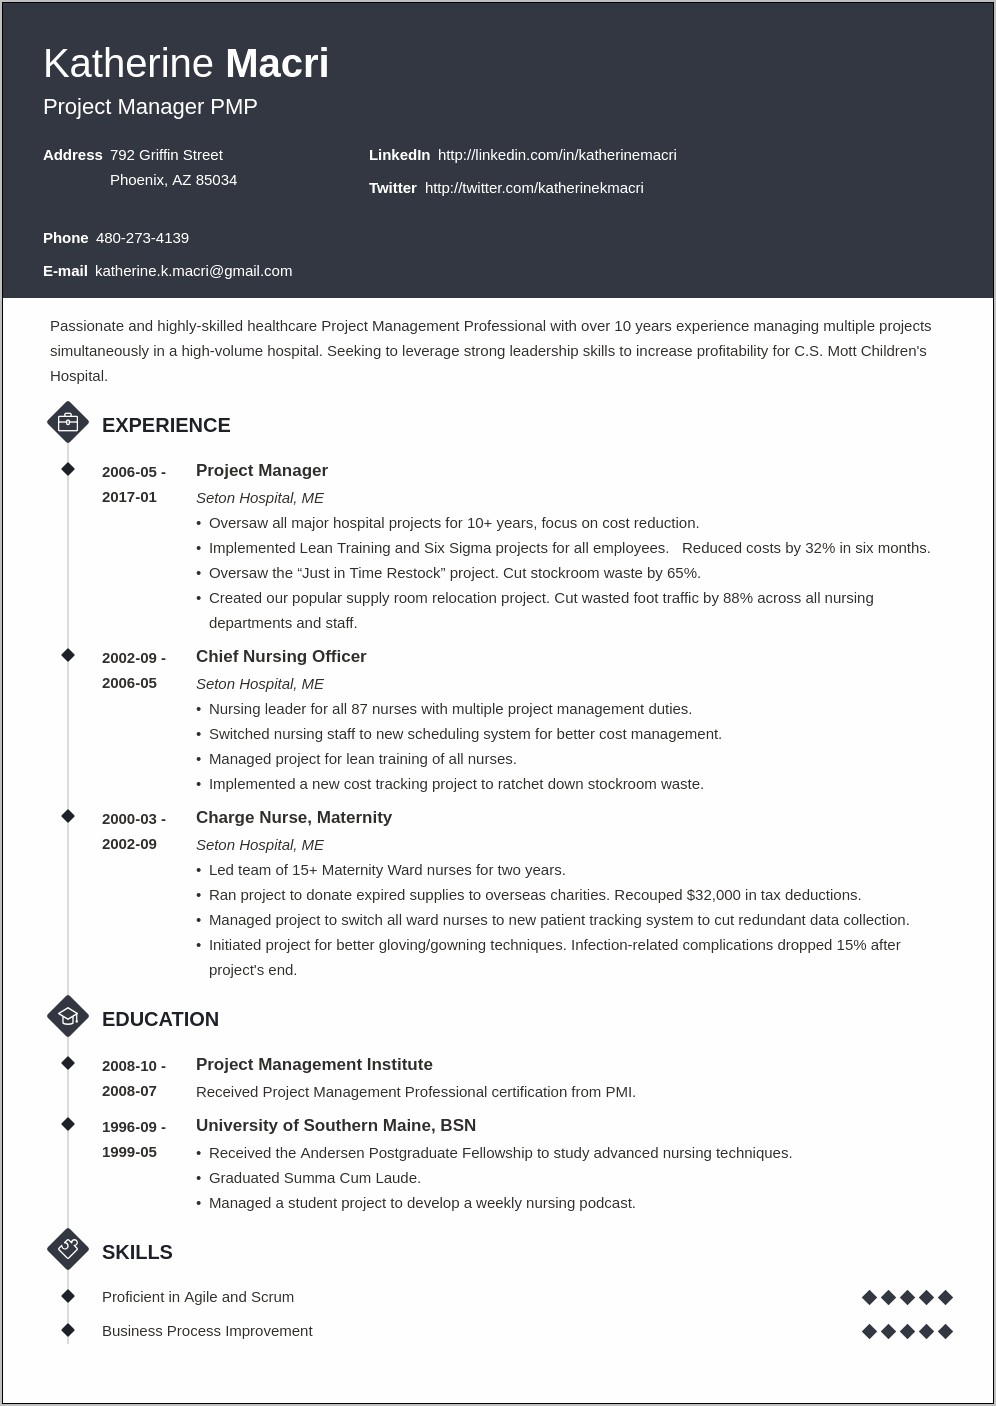 Resume Project Manager Areas Of Expertise